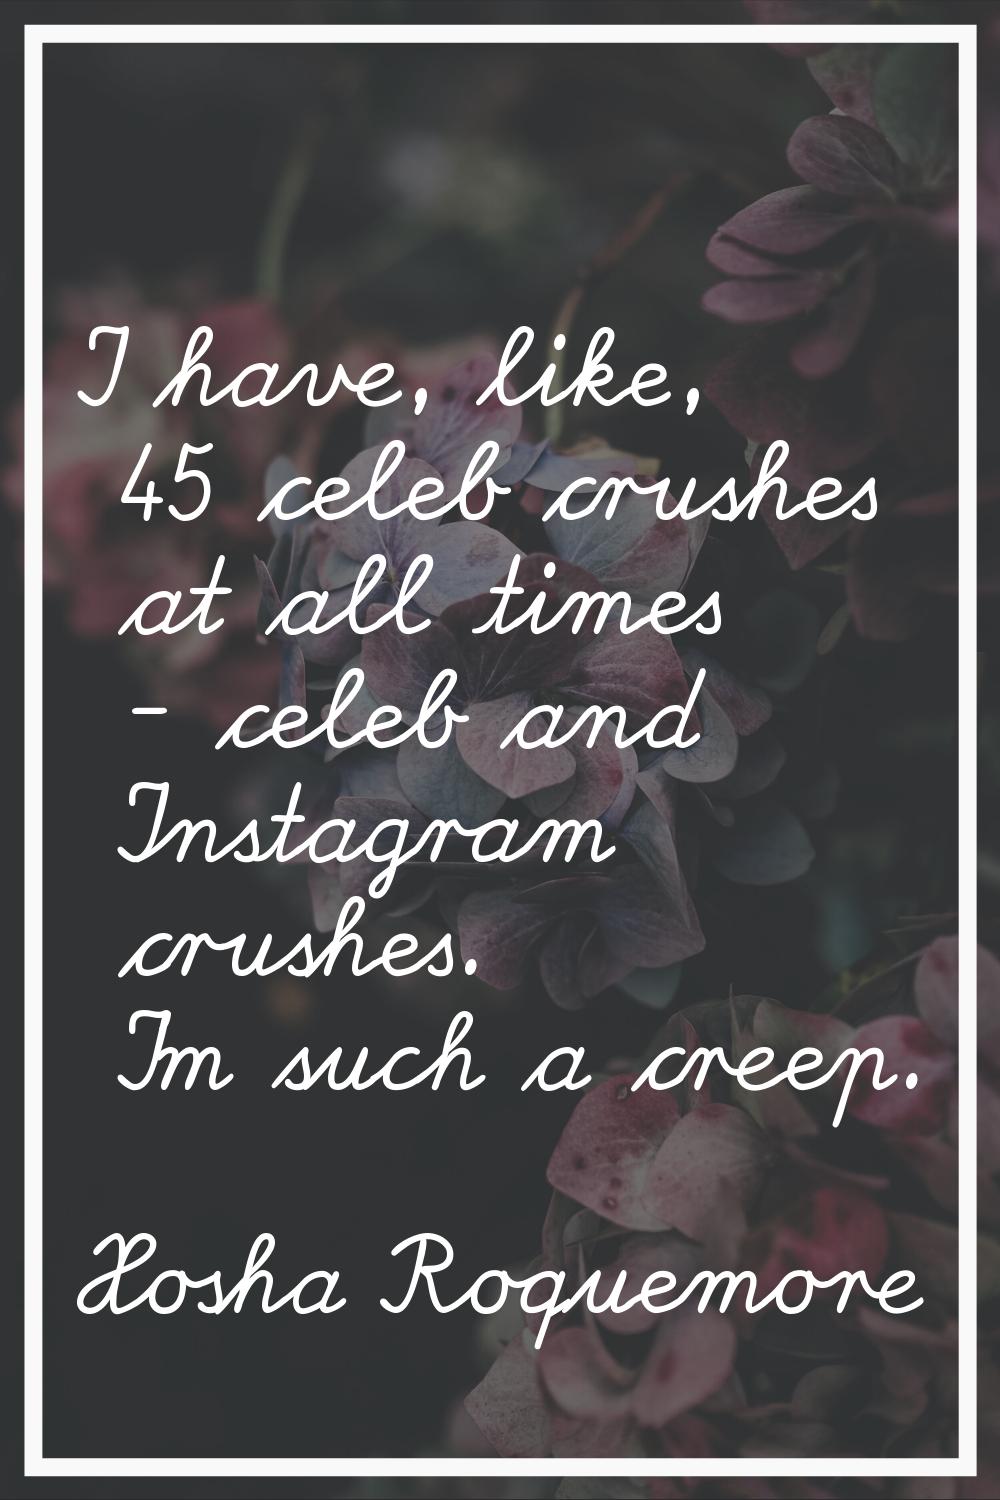 I have, like, 45 celeb crushes at all times - celeb and Instagram crushes. I'm such a creep.